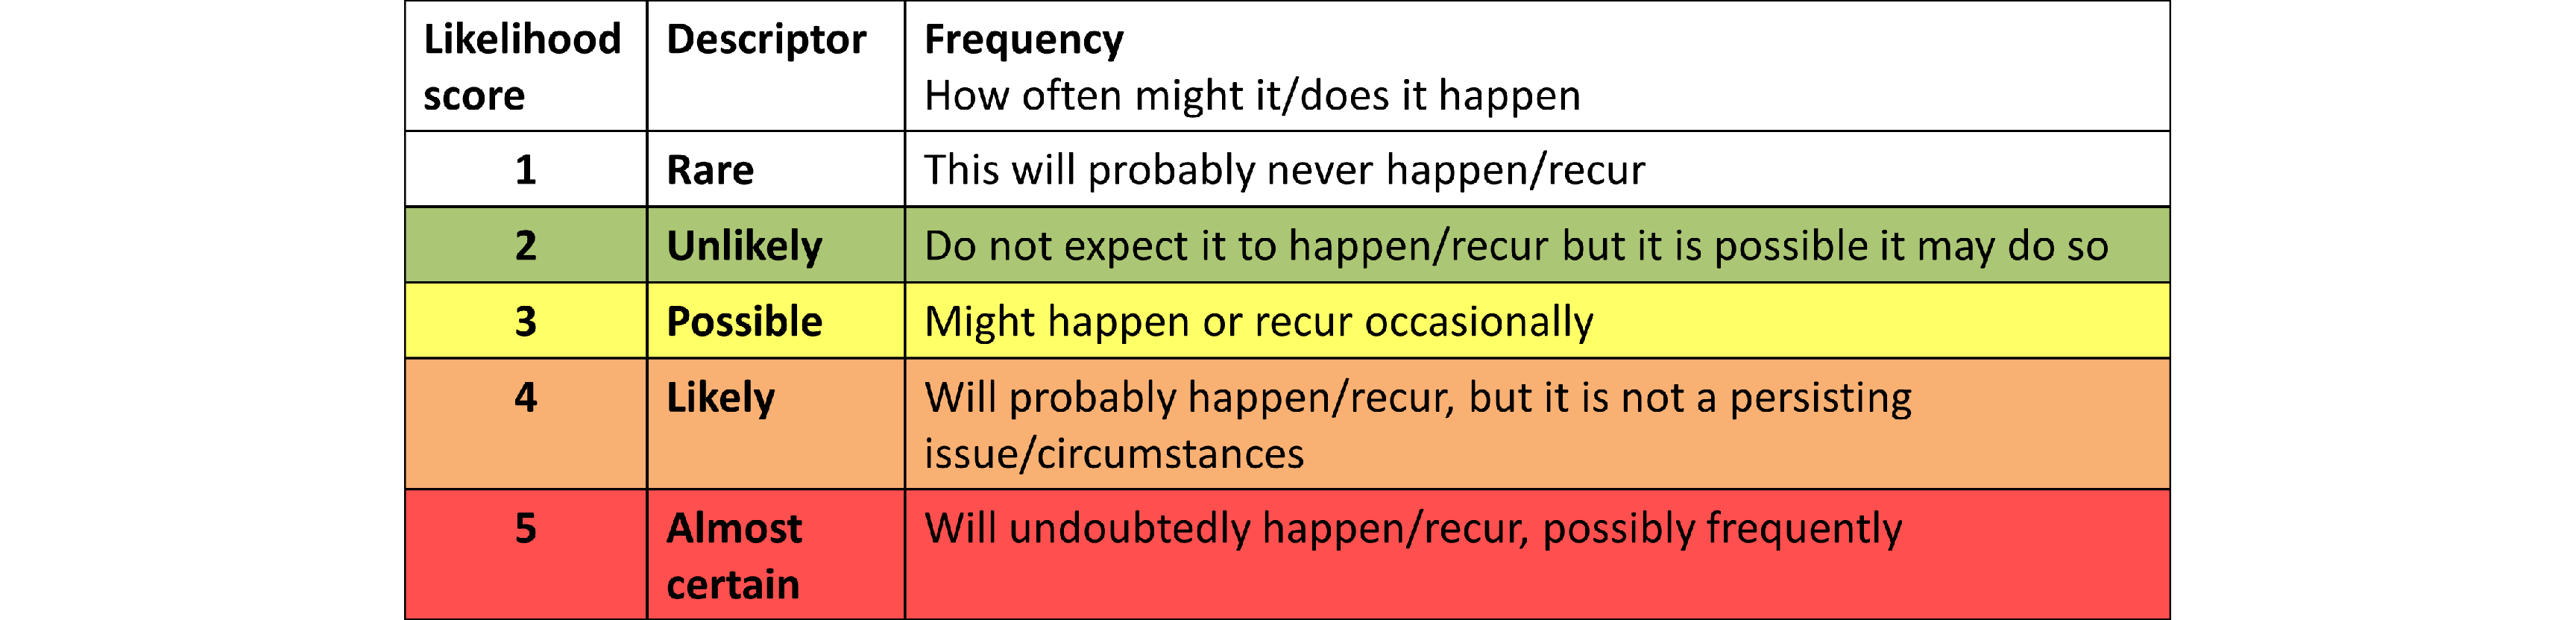 A table of likelihood score definitions. A score of 1 (Rare) is defined as: This will probably never happen or recur. A score of 2 (Unlikely) is defined as: Do not expect it to happen or recur but it is possible it may do so. A score of 3 (Possible) is defined as: Might happen or recur occasionally. A score of 4 (Likely) is defined as: Will probably happen or recur but is not a persistent issue. A score of 5 (Almost certain) is defined as: Will undoubtedly happen or recur, possibly frequently.